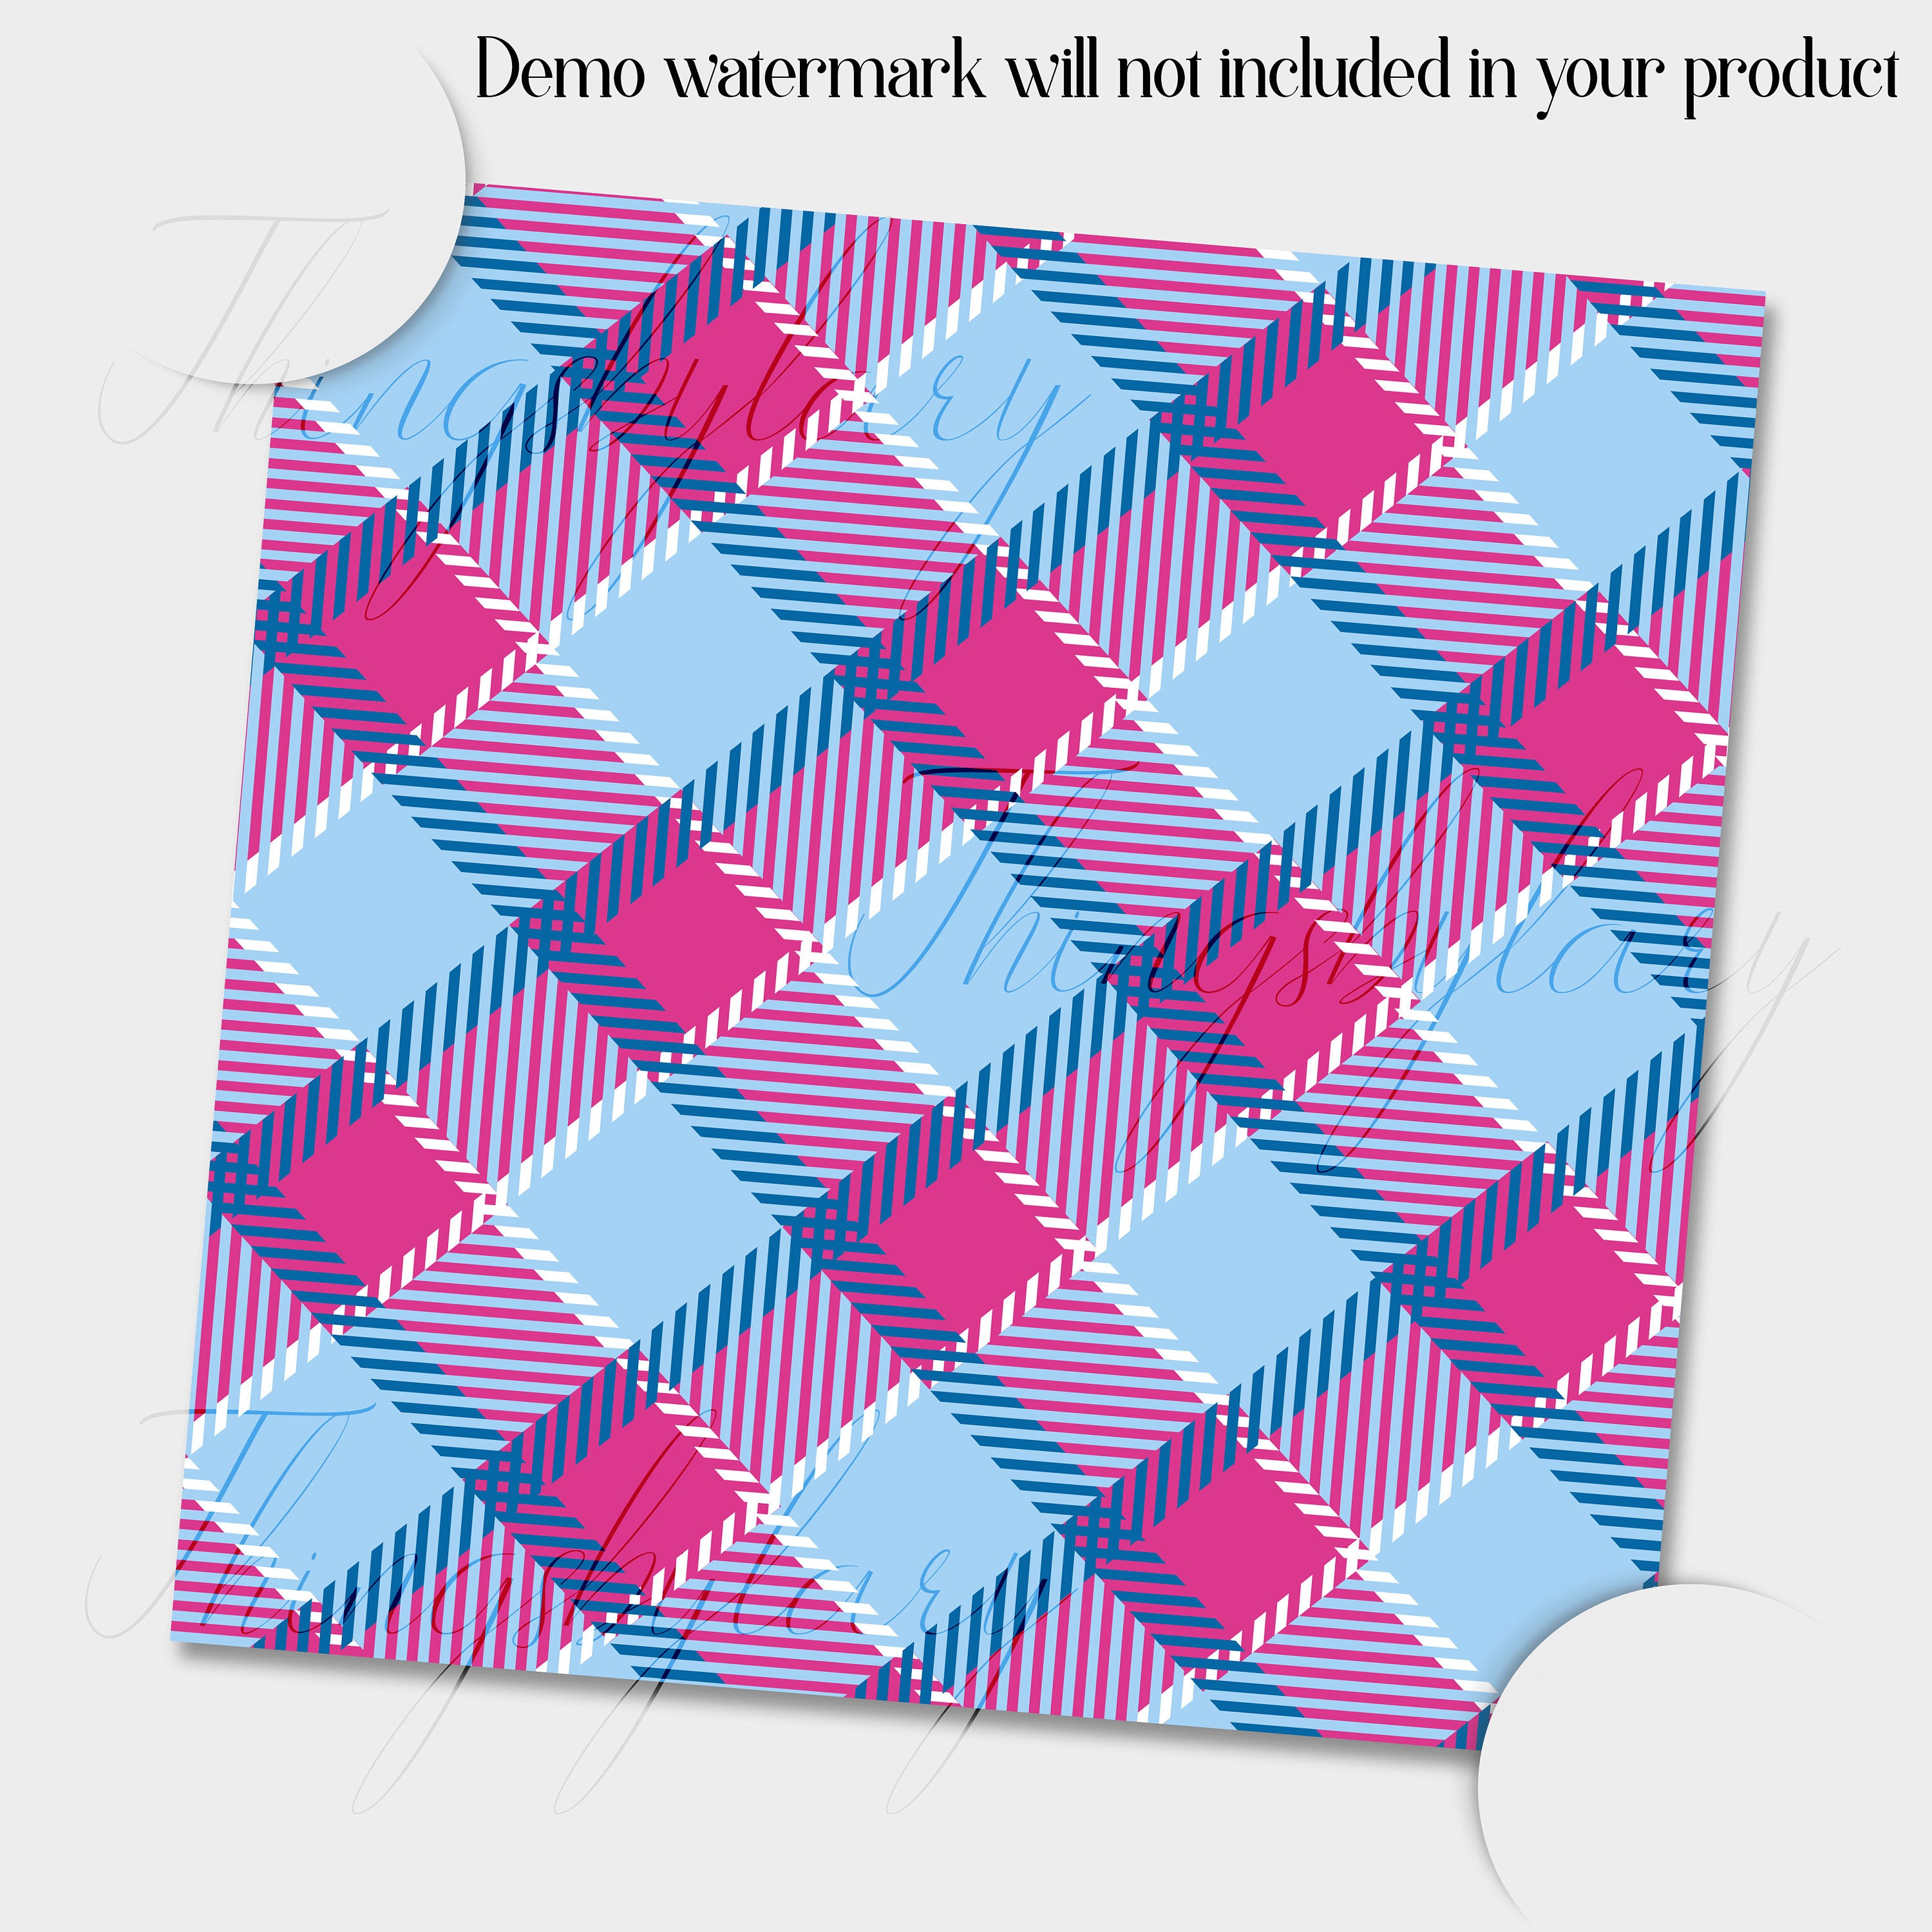 24 Pink and Blue Plaid Digital Papers 12inch 300 Dpi Instant Download, Scrapbook Papers, Tartan, Gingham, Check, Commercial Use